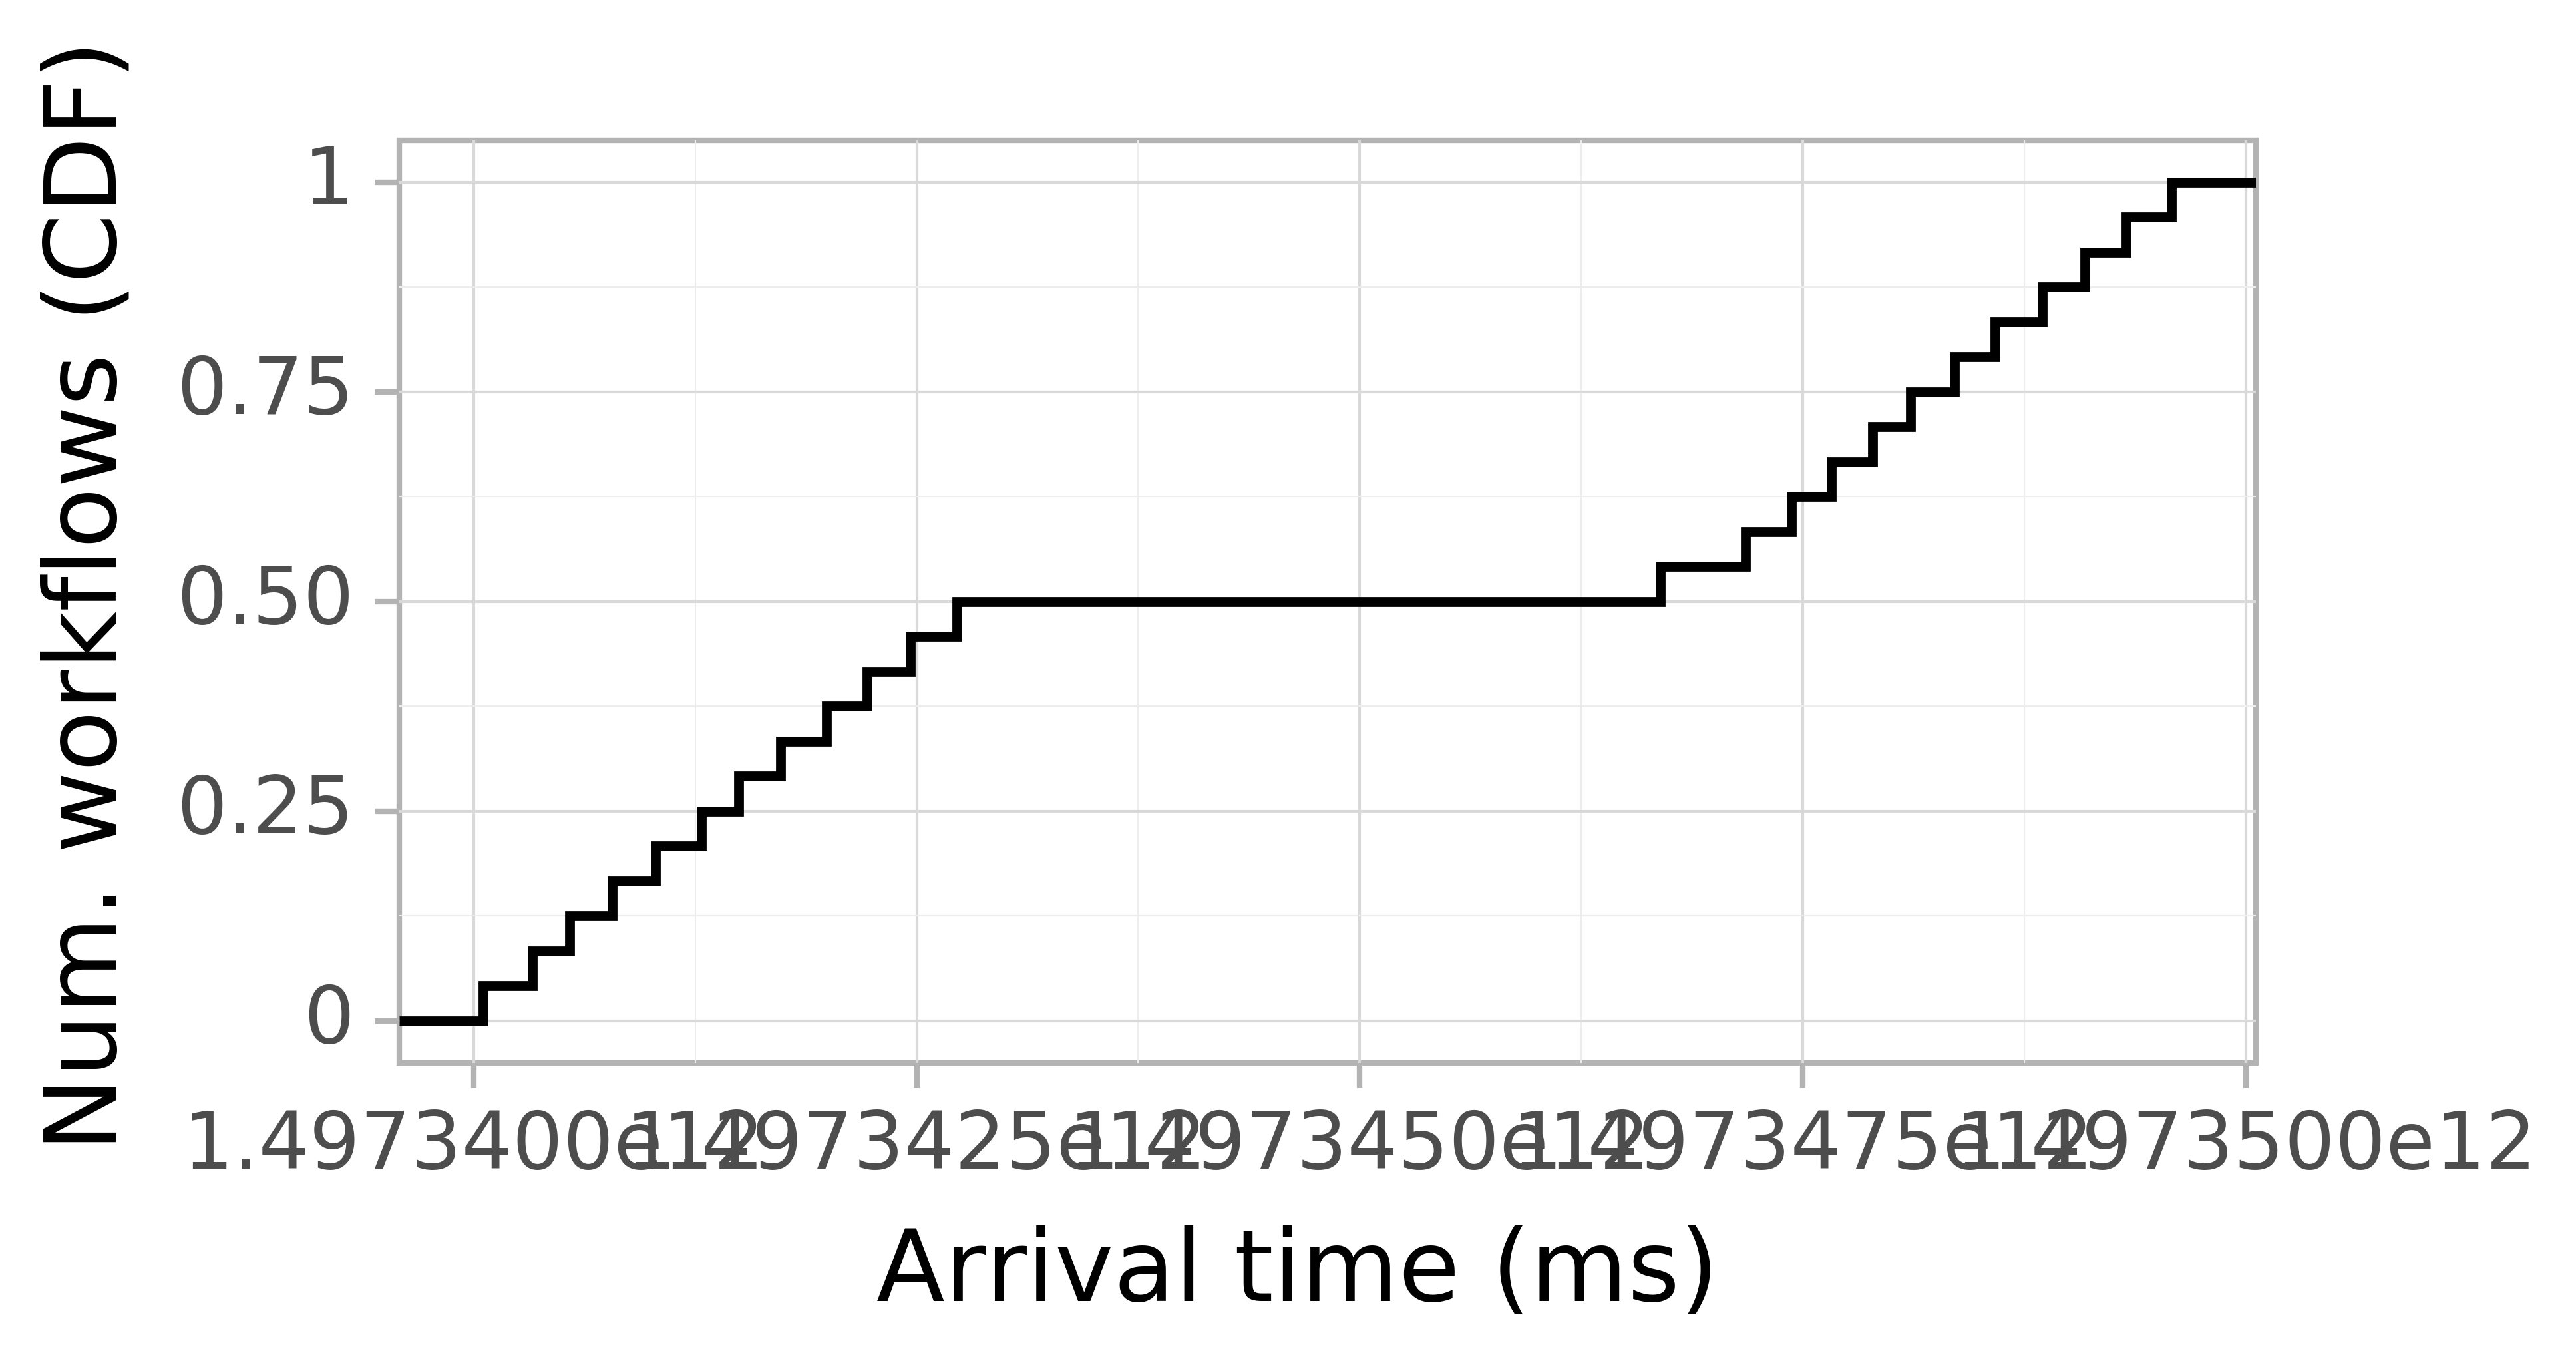 Job arrival CDF graph for the askalon-new_ee69 trace.